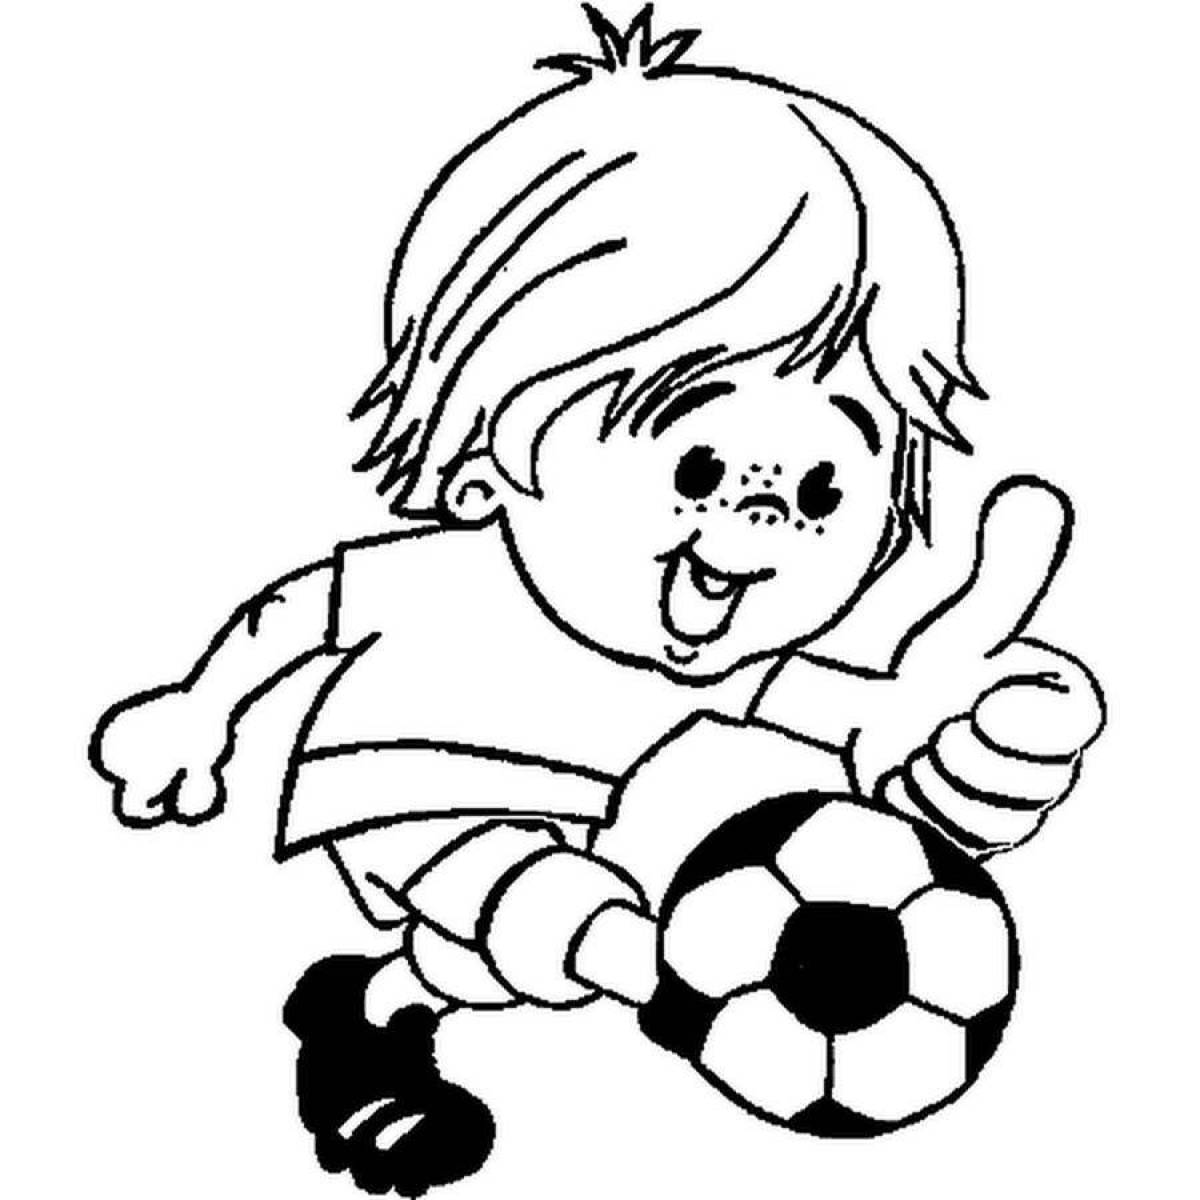 Fabulous football coloring book for kids